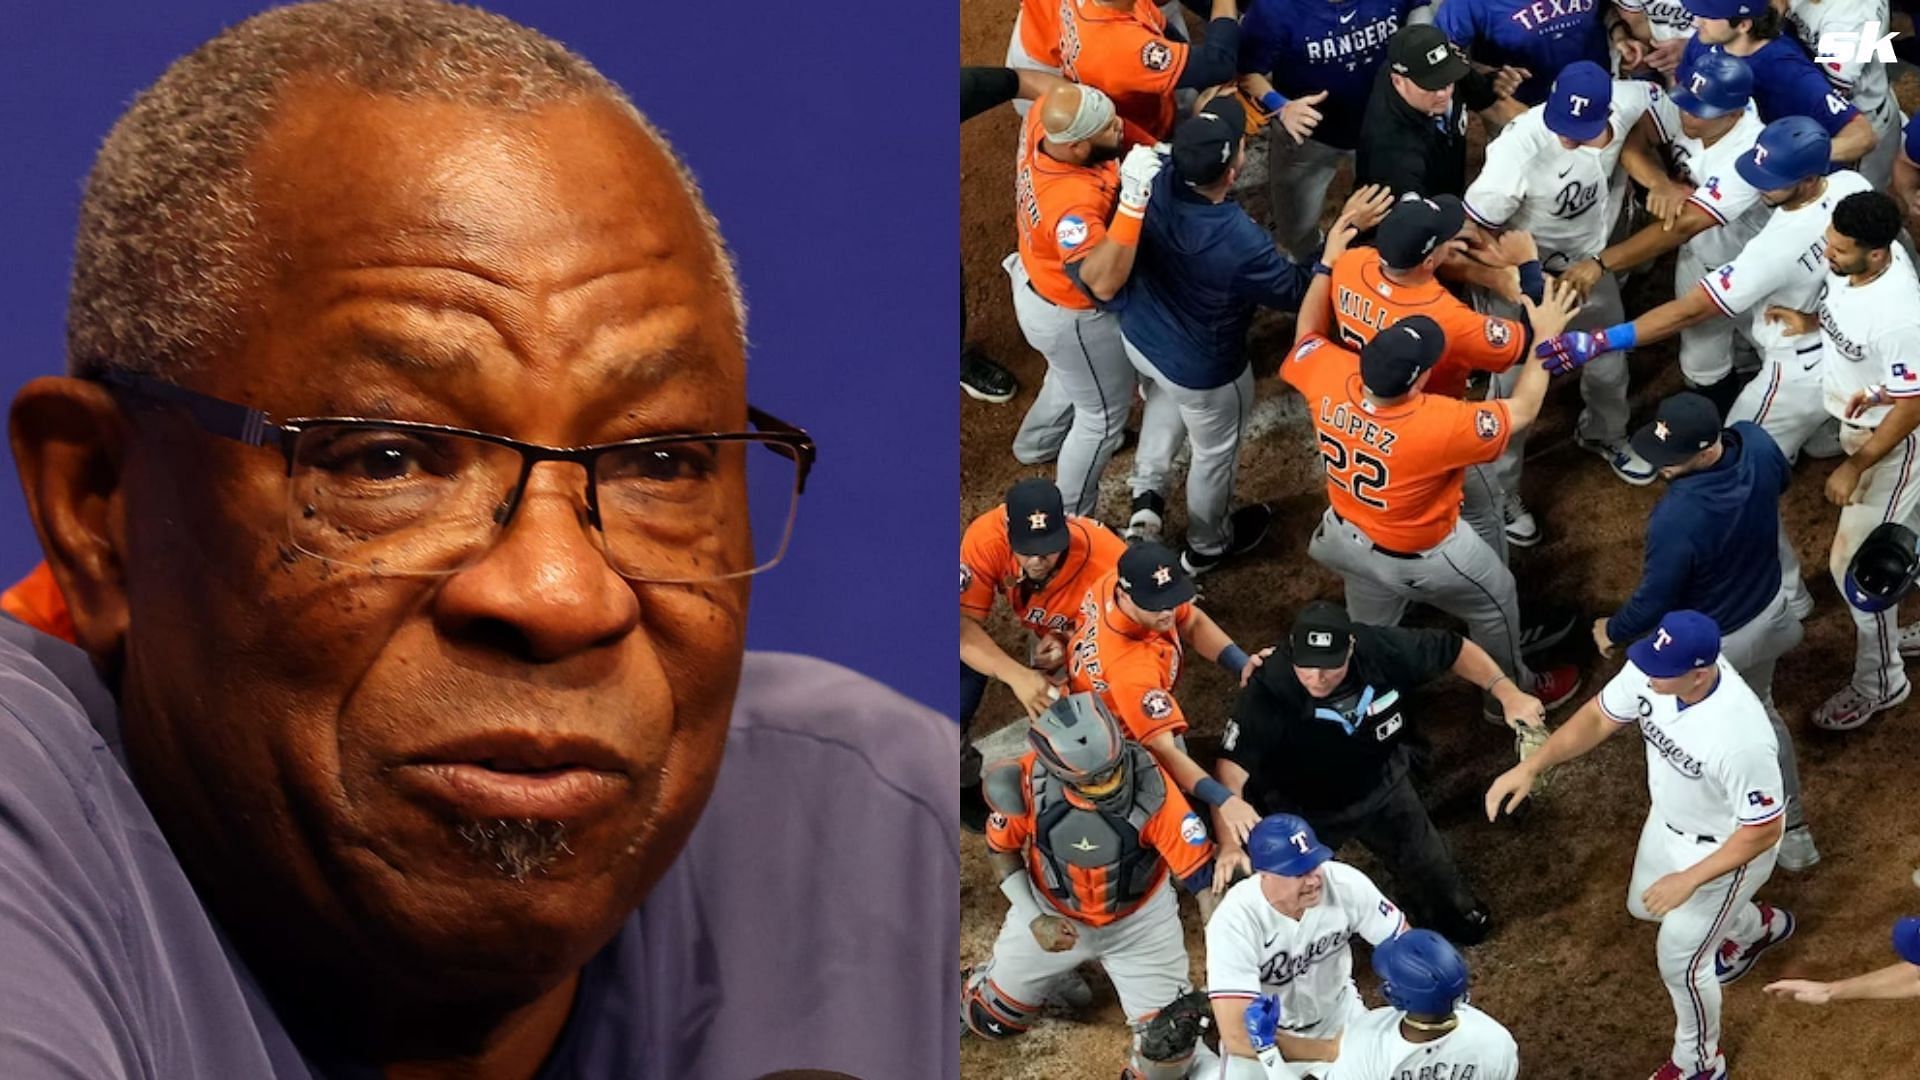 One of the baddest dudes': Dusty Baker's awesome Jose Altuve shoutout after  Game 5 heroics